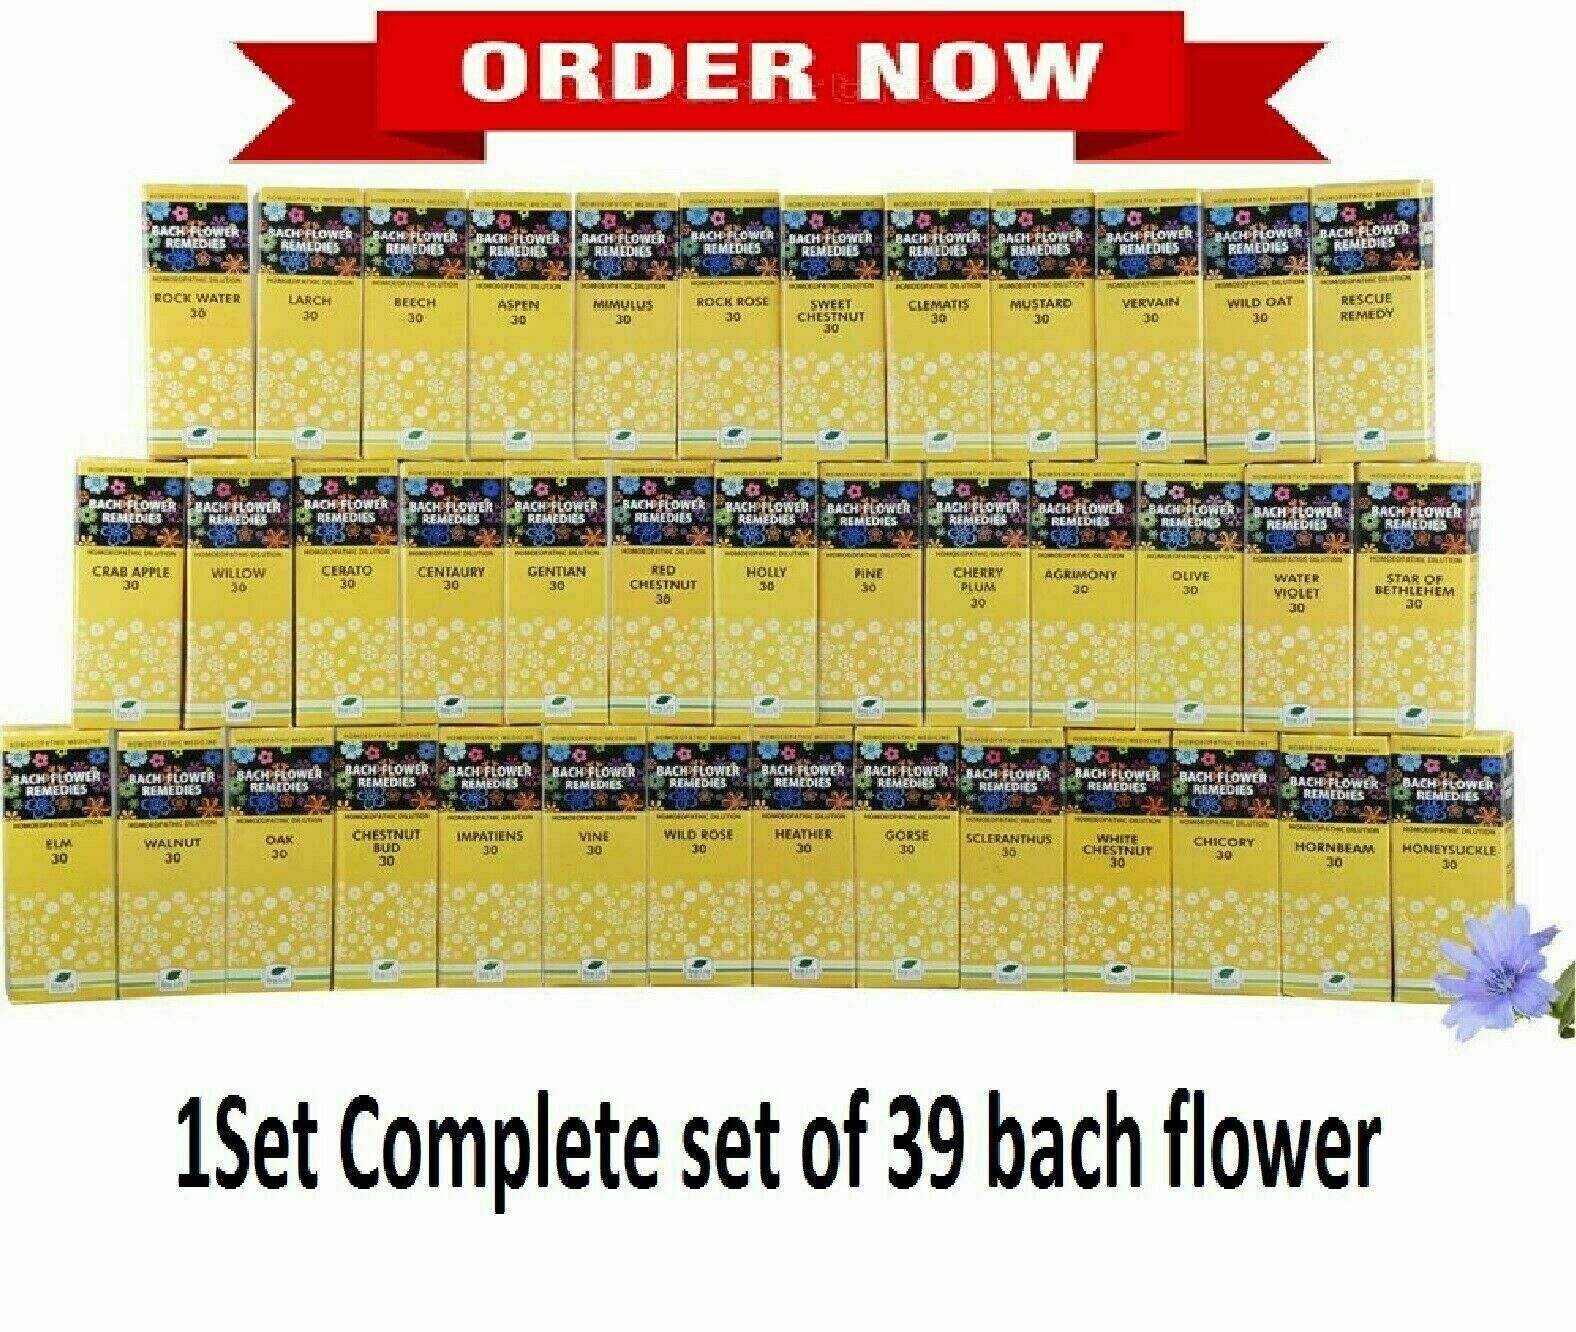 New Life Bach Flower Remedies Kit (30ml) 1Set Complete set of 39 bach flower